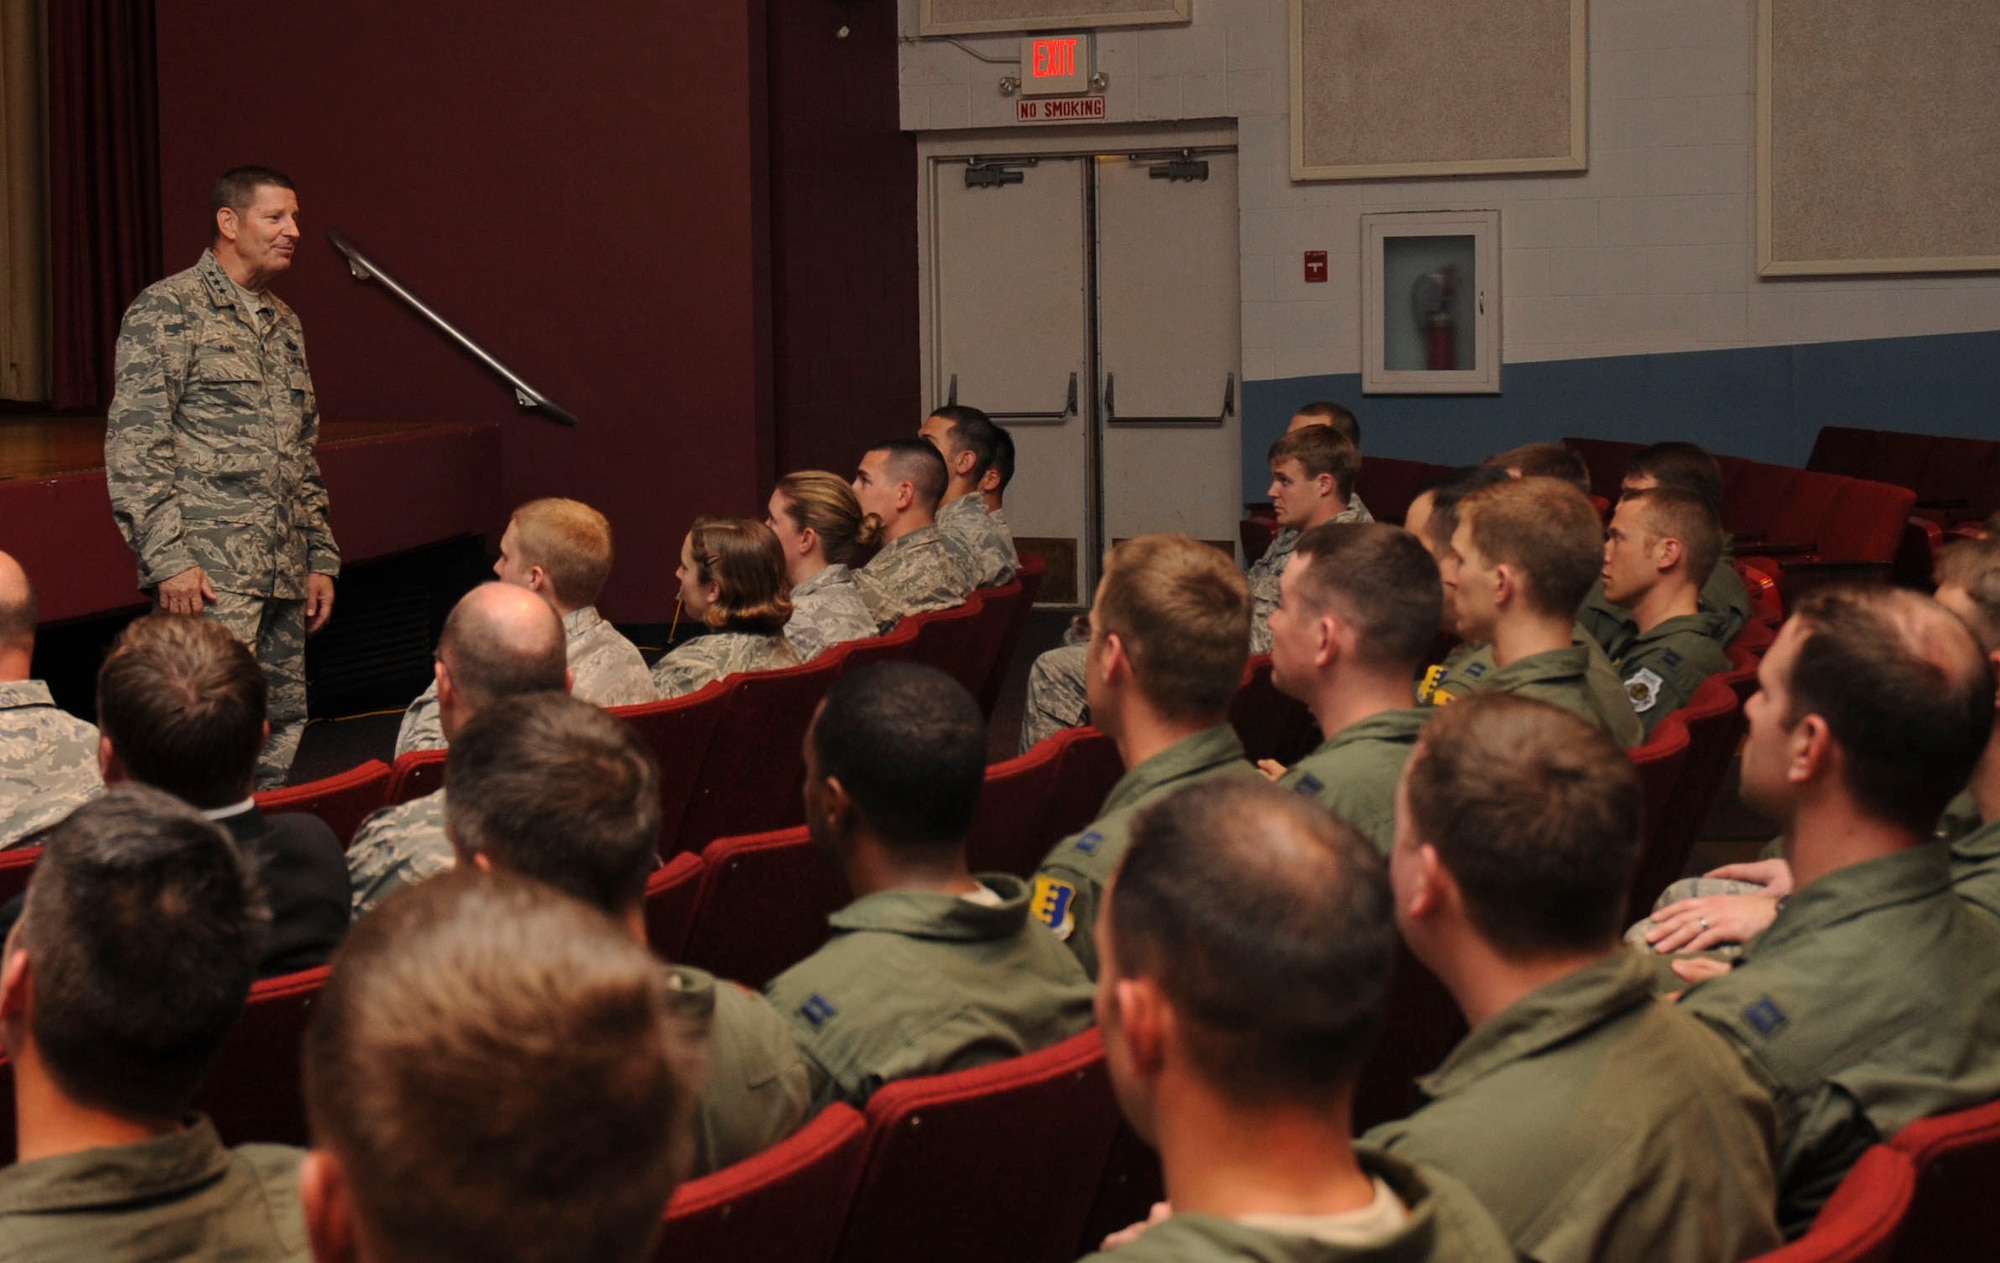 Lt. Gen. Robin Rand, 12 Air Force commander, speaks to officers during the 12th Air Force commander’s call at the base theater on Ellsworth Air Force Base, S.D., July 13, 2012. Lt. Gen. Rand visited various base facilities where he had the opportunity to observe many facets of Ellsworth’s mission. (U.S. Air Force photo by Airman 1st Class Anania Tekurio/Released)  